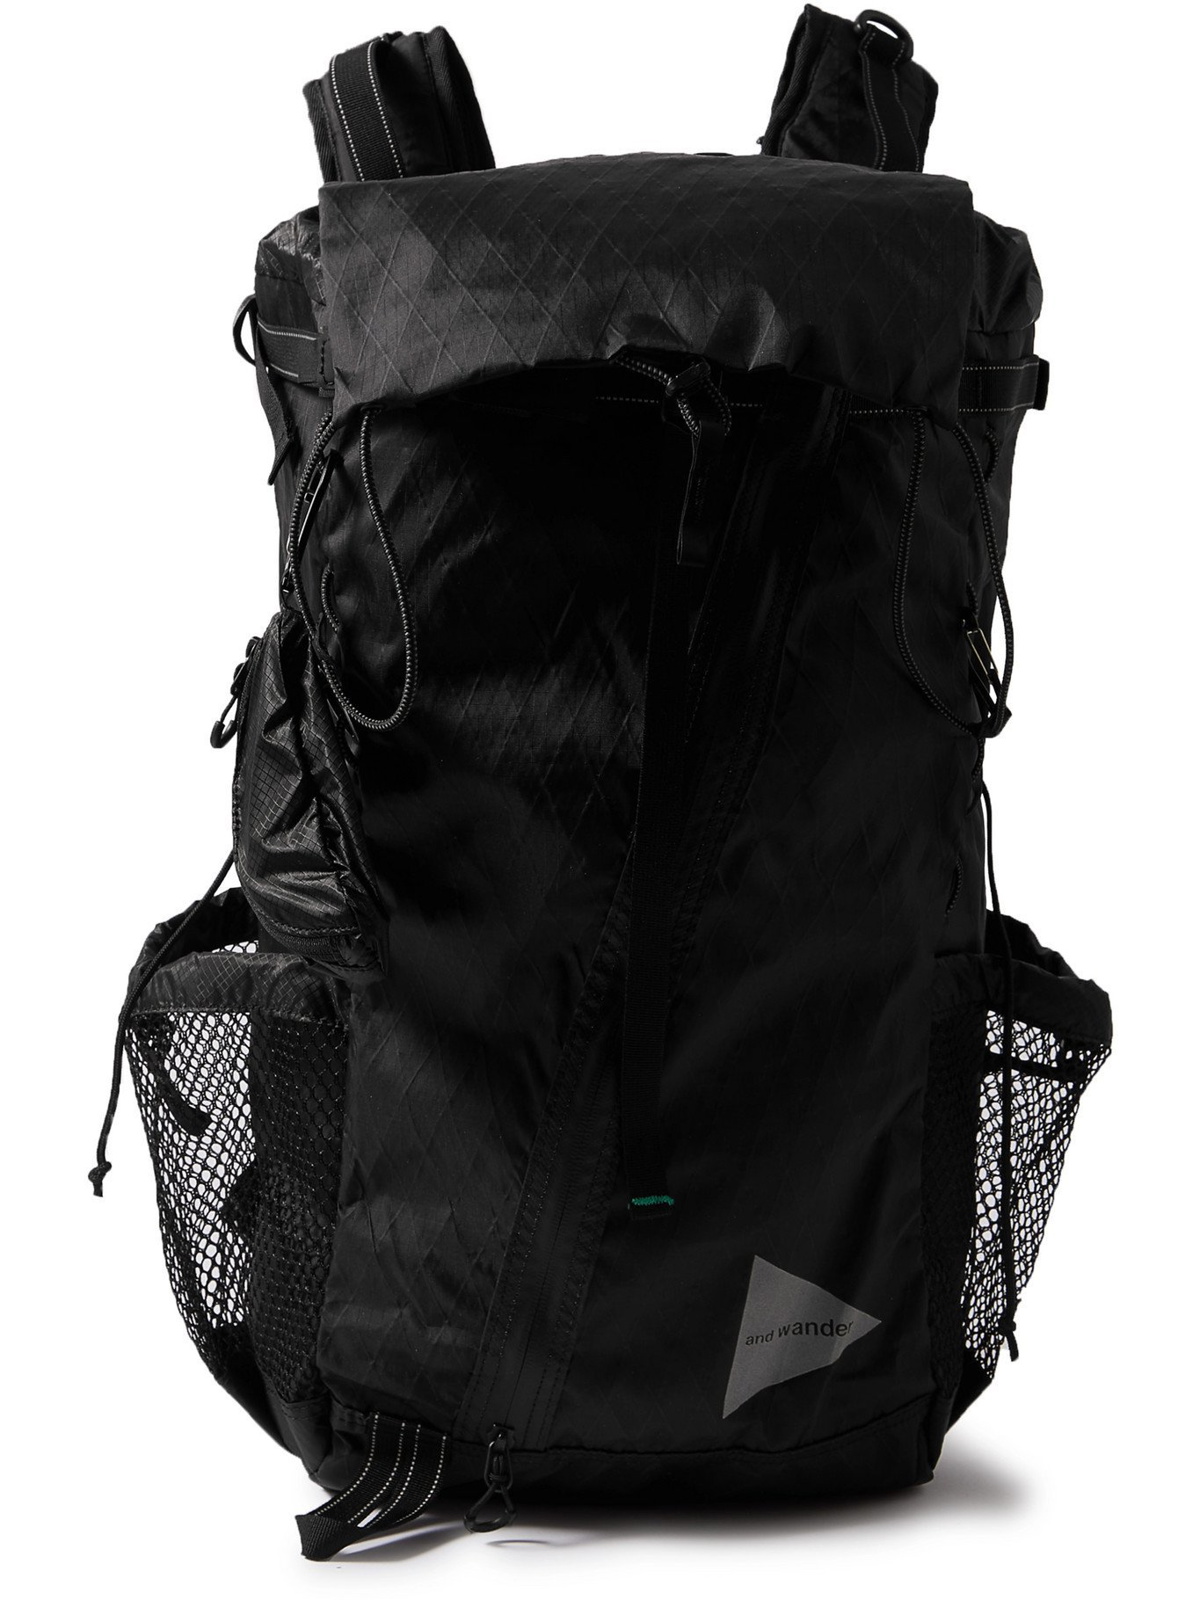 AND WANDER - X-Pac Printed Ripstop Backpack and Wander